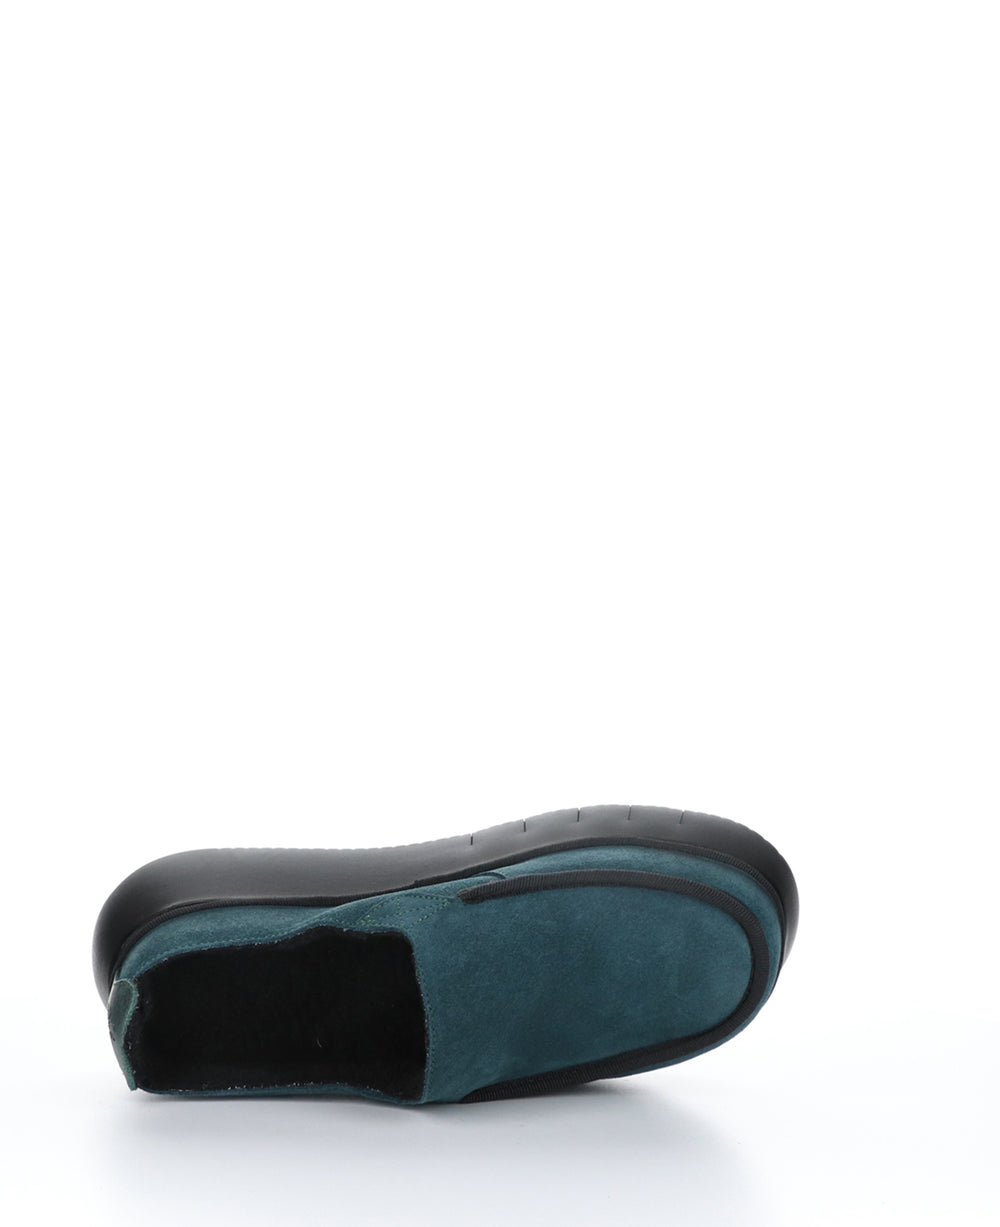 CEZE361FLY PETROL Round Toe Clogs|CEZE361FLY Chaussures à Bout Rond in Vert